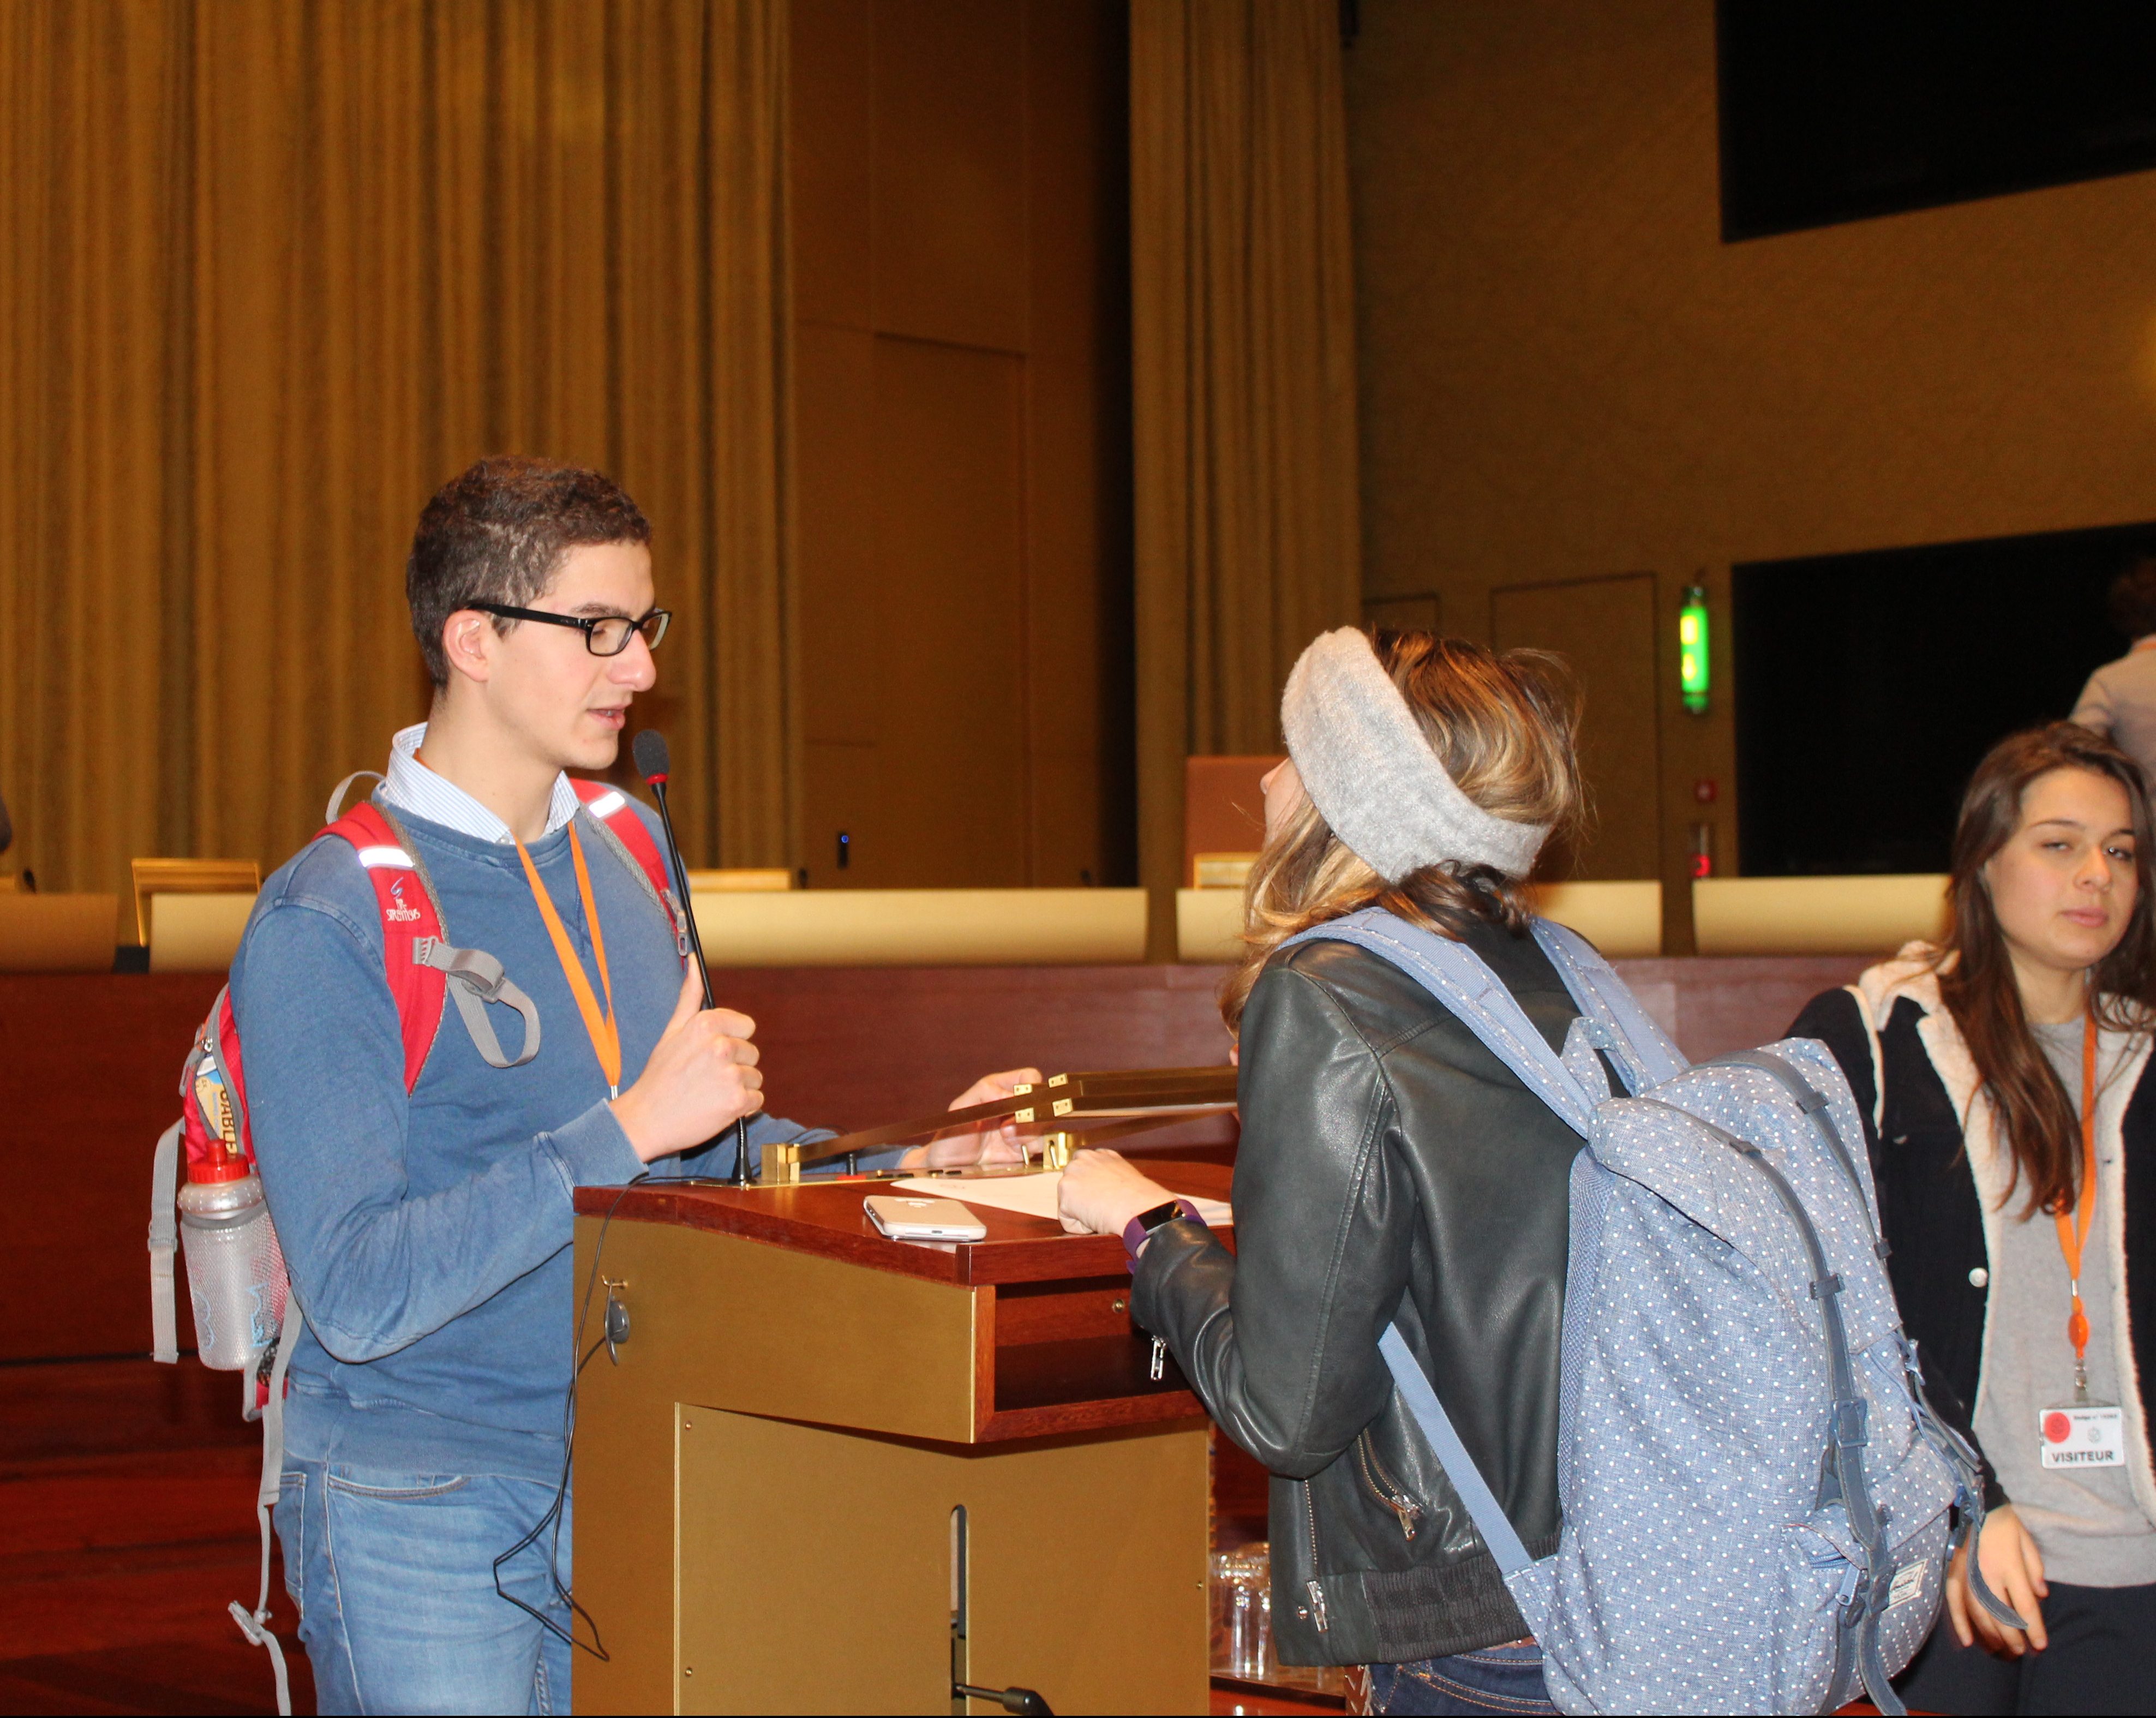 Throw back : Our students went to the European court of Justice in Luxembourg